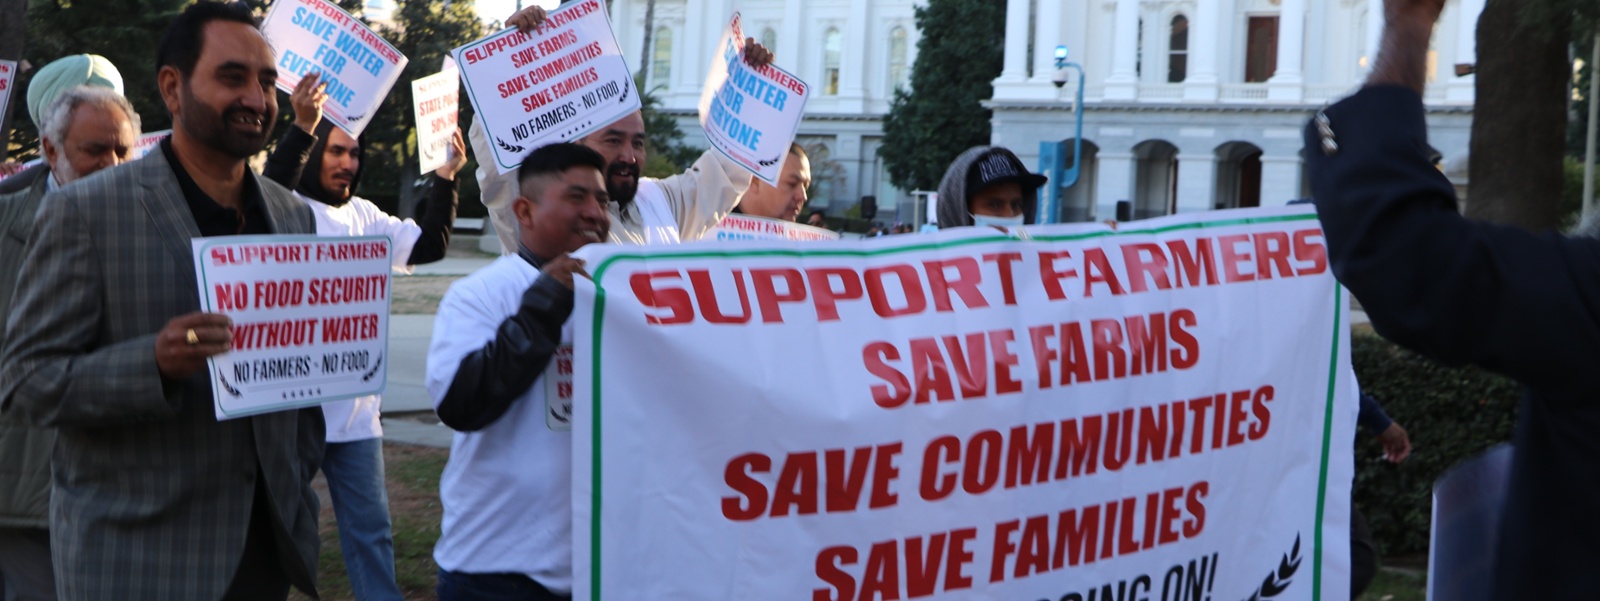 Madera farmers march on Capitol, protest water fees